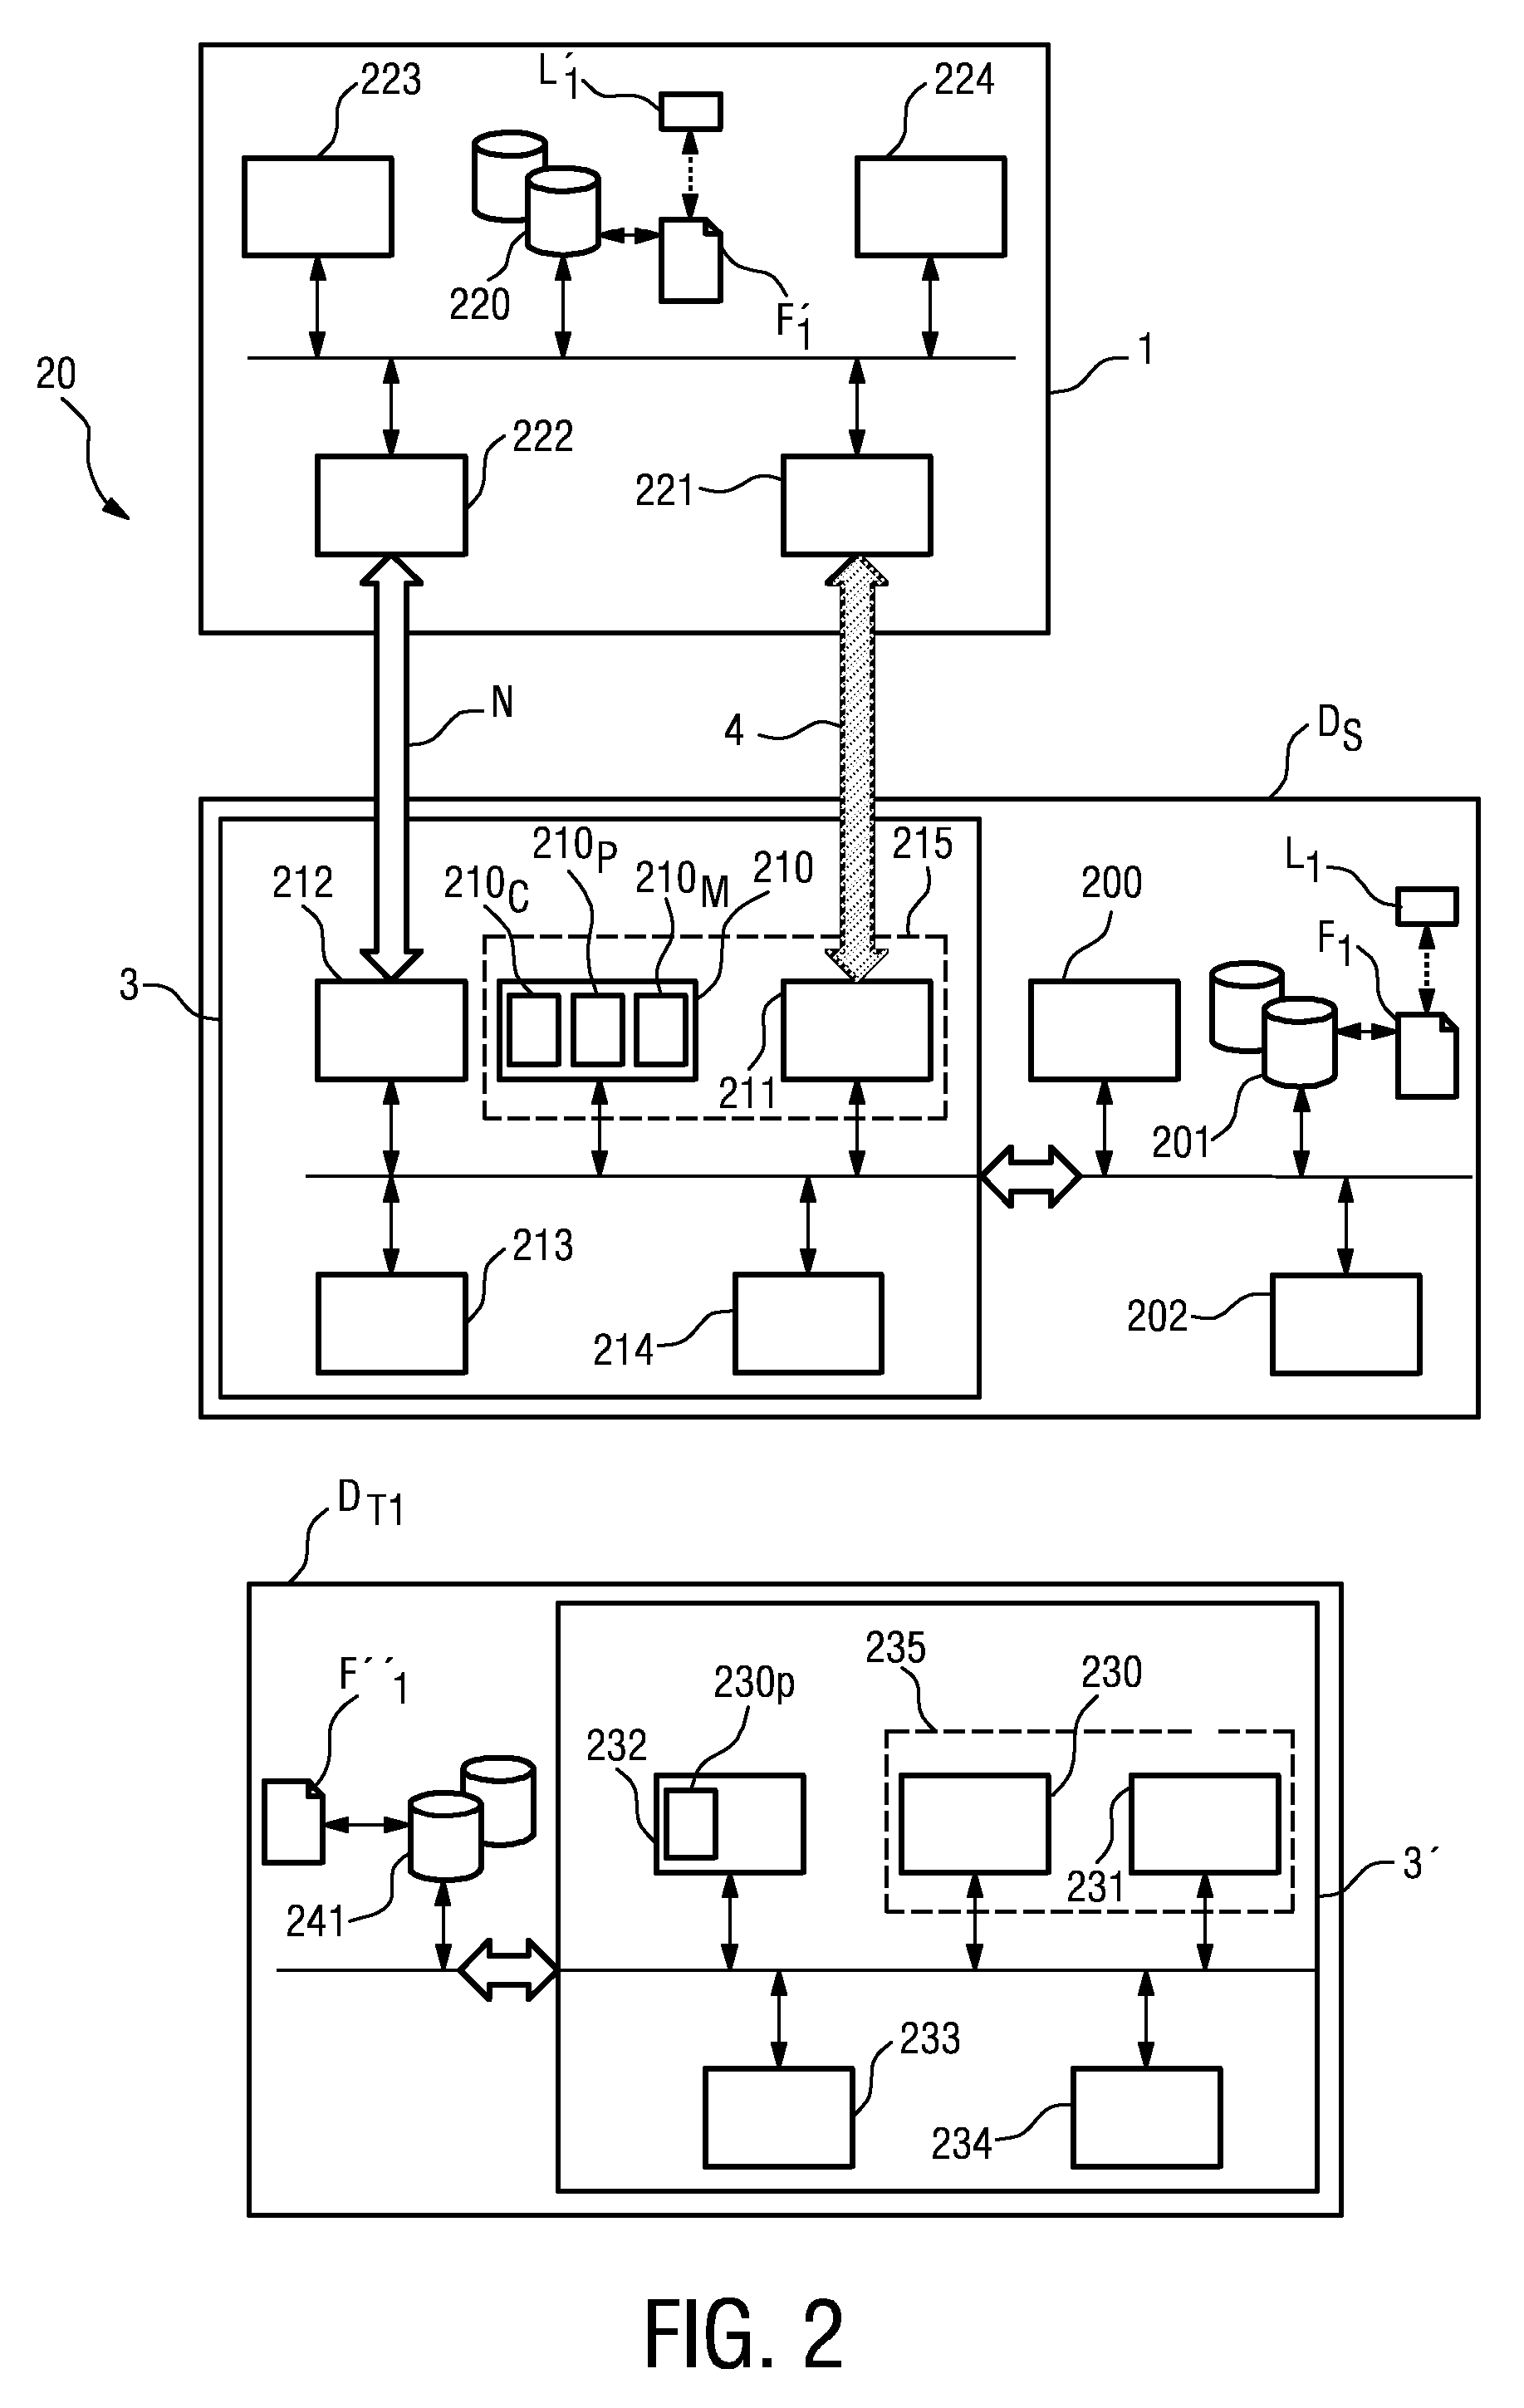 Method of transferring application data from a first device to a second device, and a data transfer system